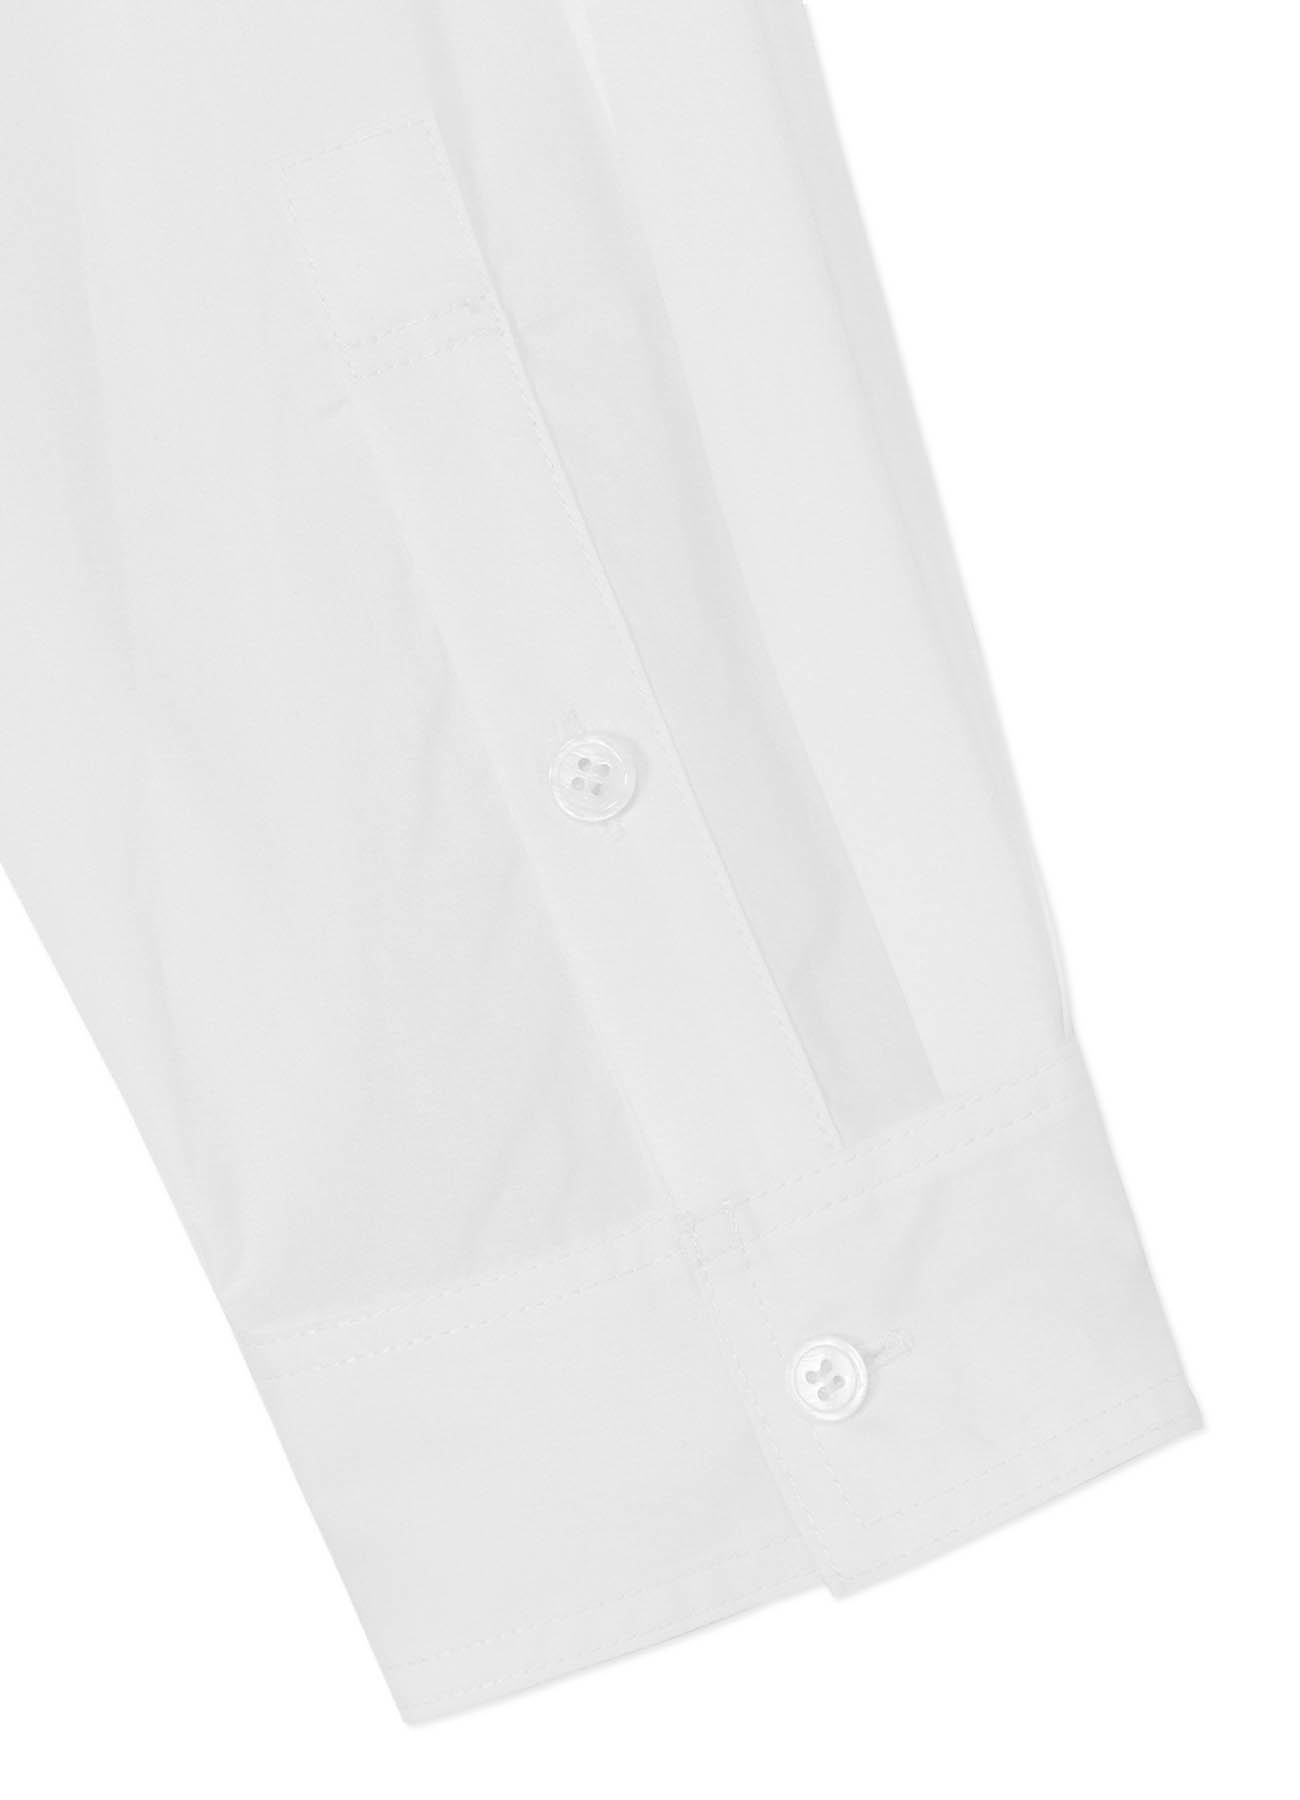 COTTON BROADCLOTH DOUBLE LEFT PANEL SHIRT WITH BELT